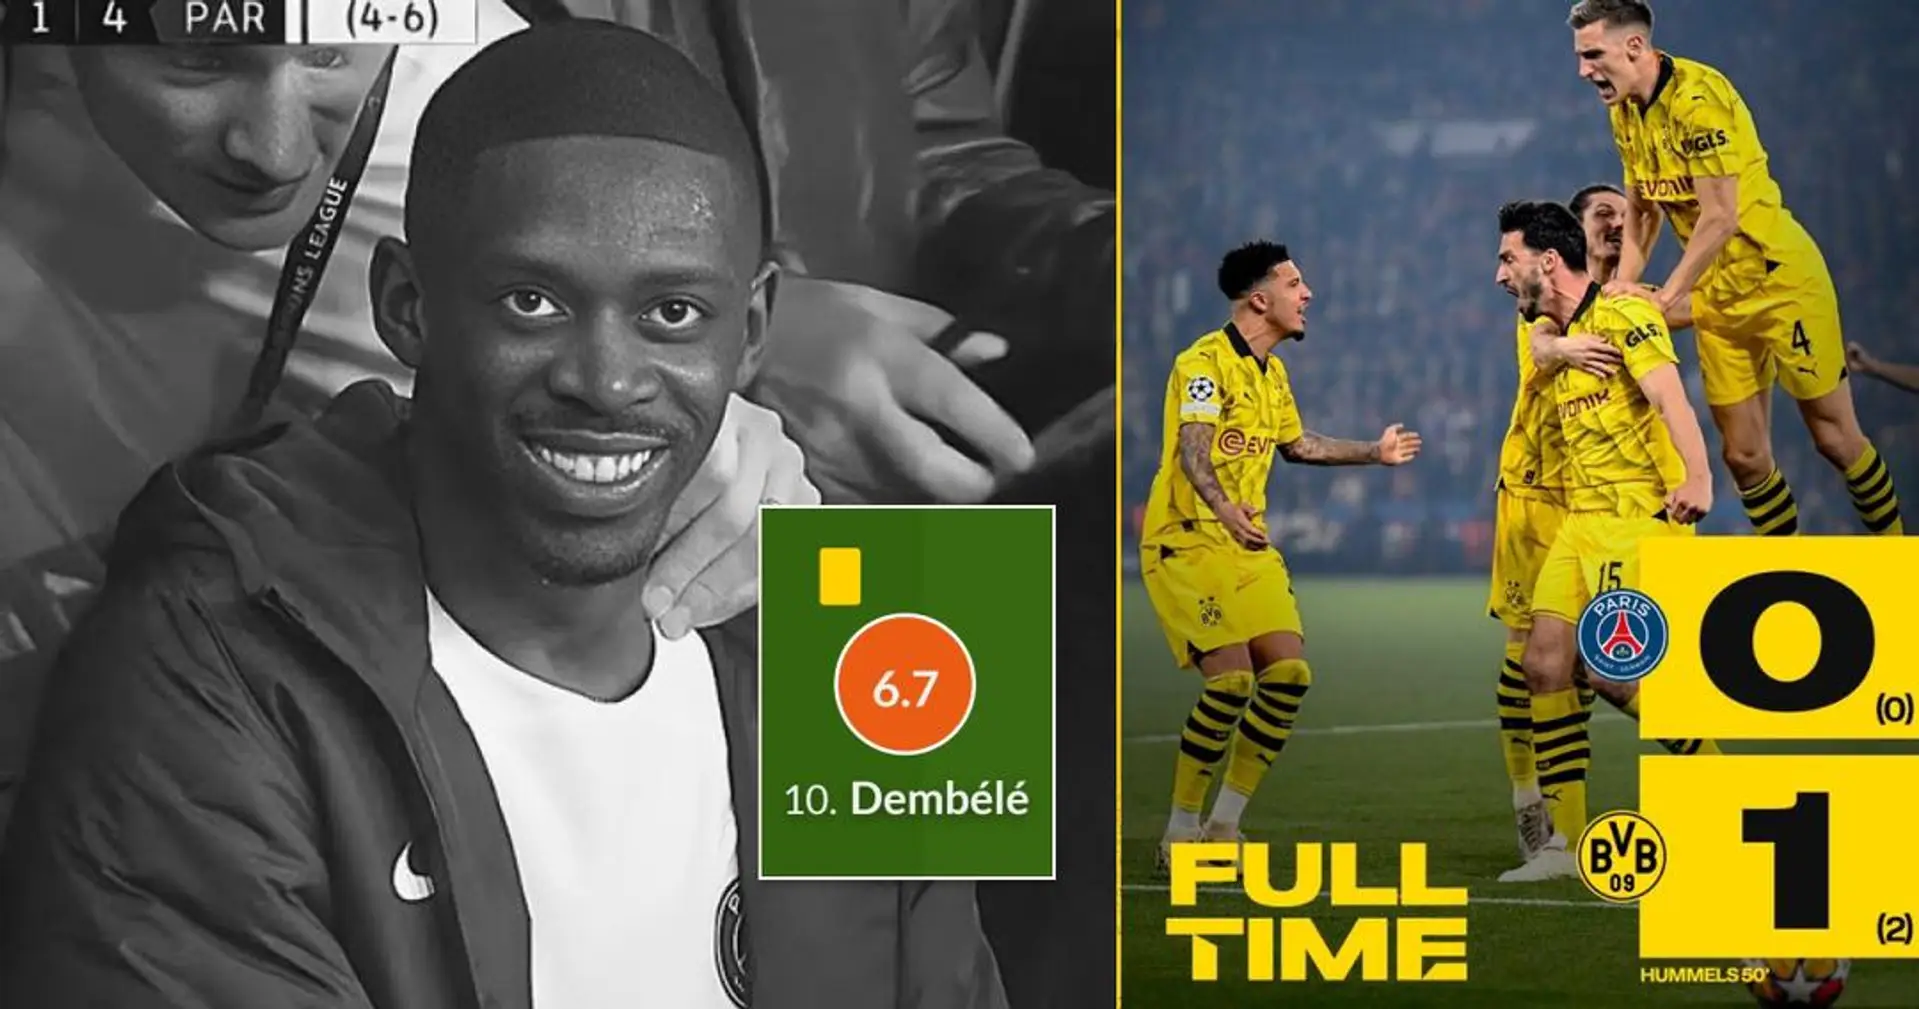 'Let's all laugh': Culers finally get their revenge on Dembele 